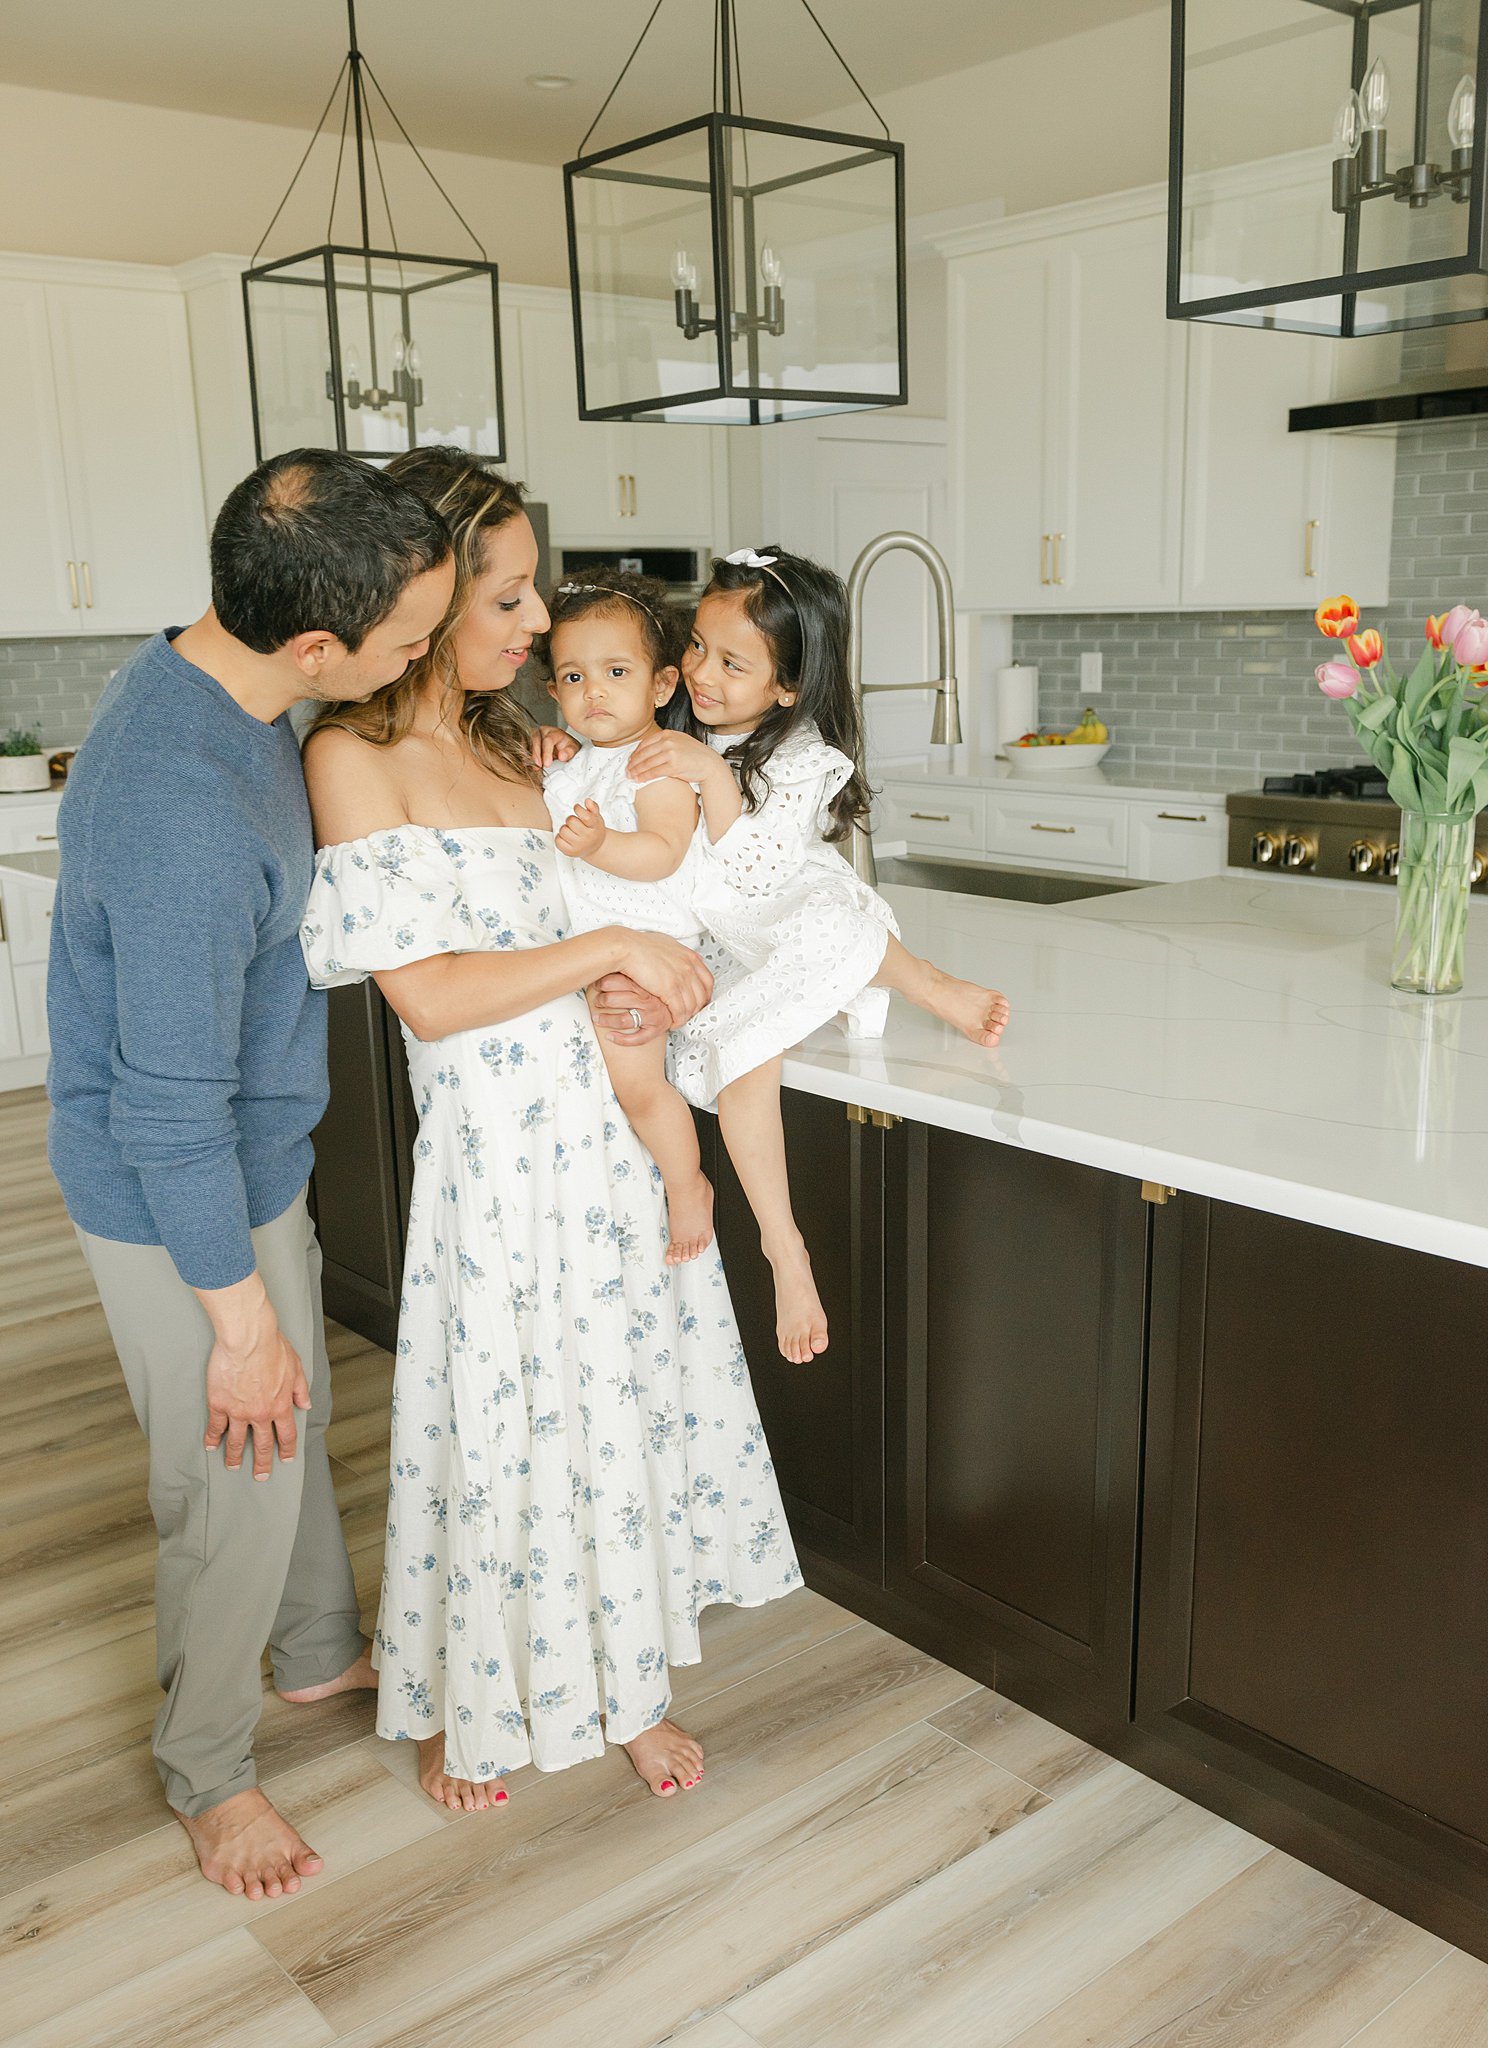 A mom holds her infant daughter while dad and their young daughter lean in on either side in a kitchen